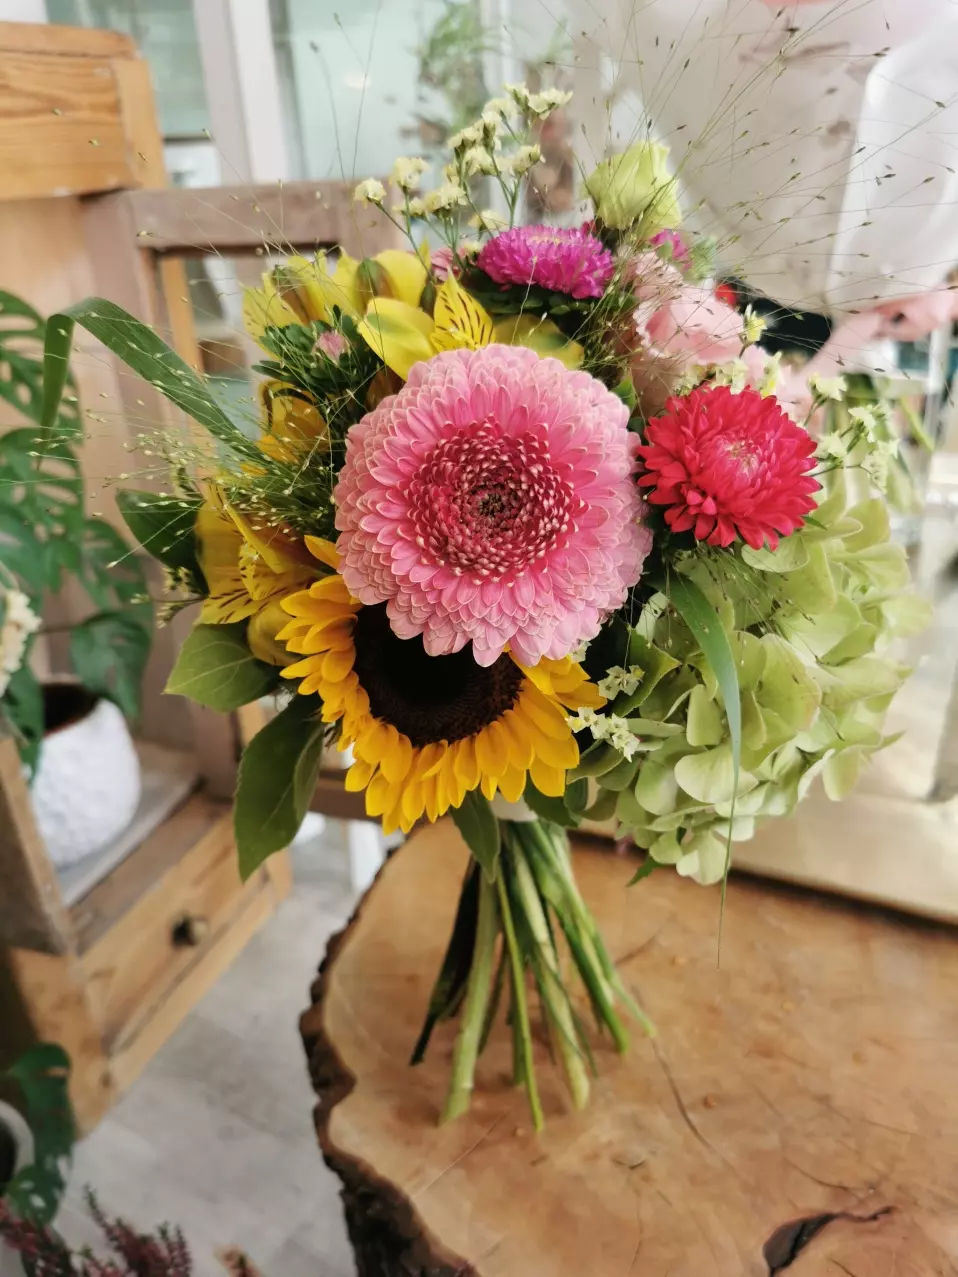 Hydrangeas, sunflowers, carnations, limoniums, asters and grasses. This is a juxtaposition of seasonal flowers, expressive in colour and shape.